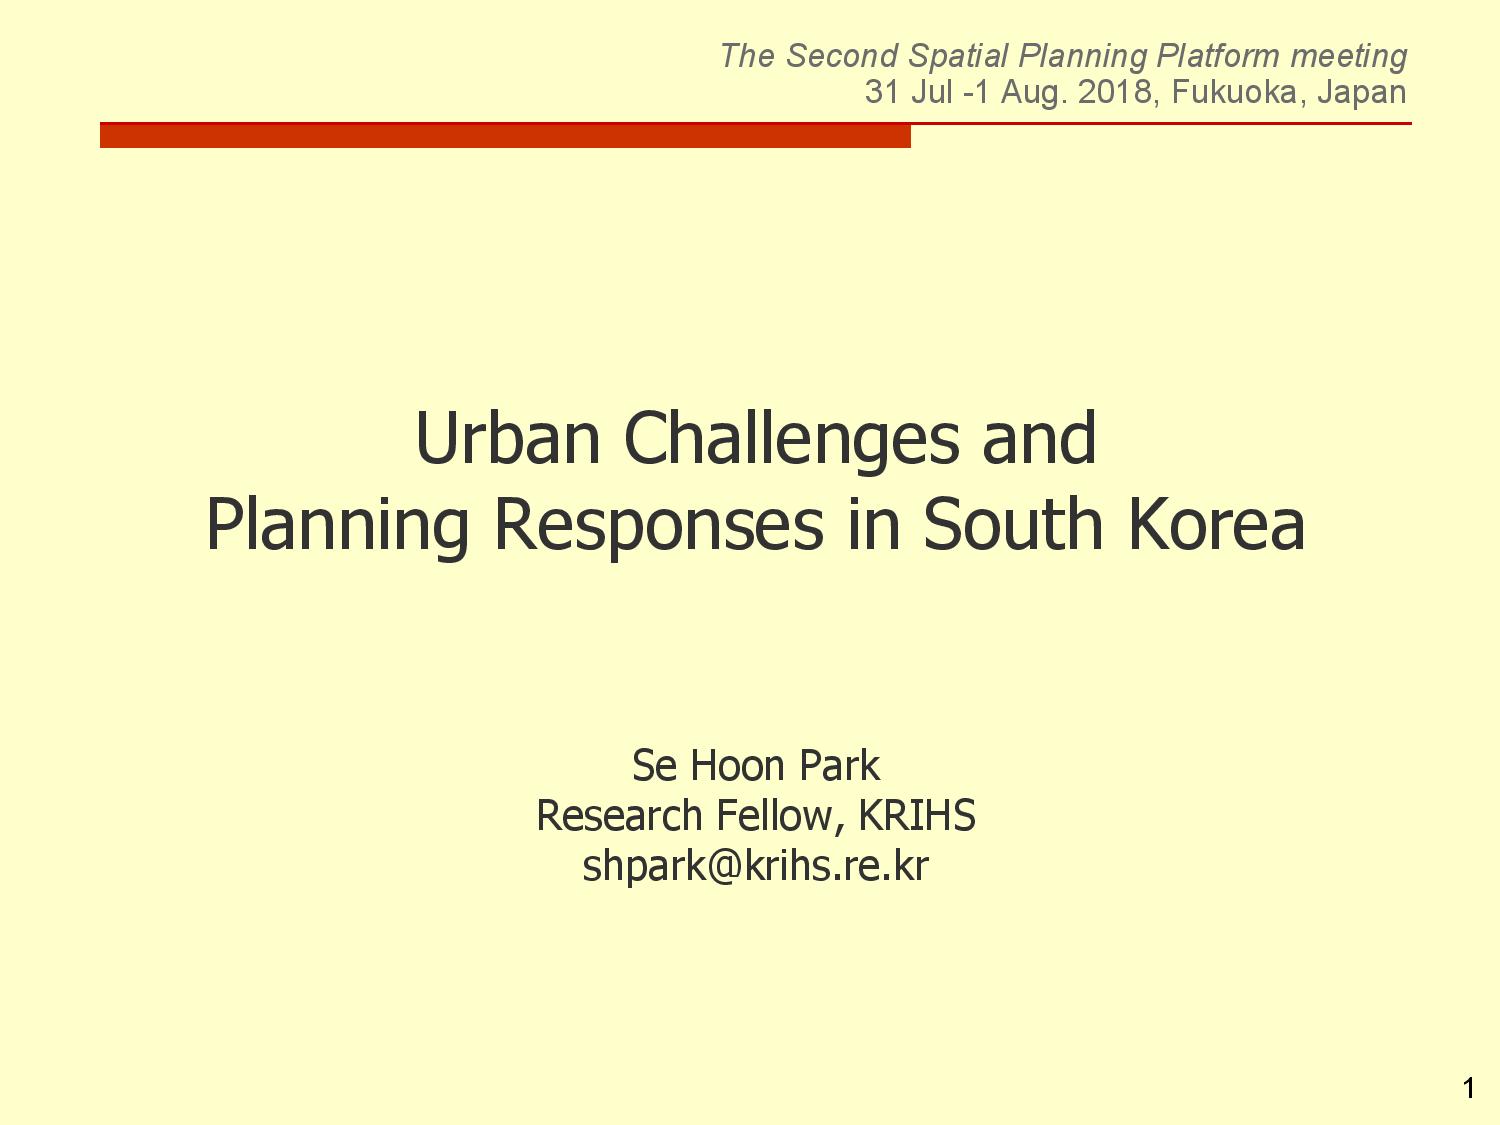 1st Spatial Planning Platform (SPP) Meeting: Part I – Urban Challenges and Planning Responses in South Korea